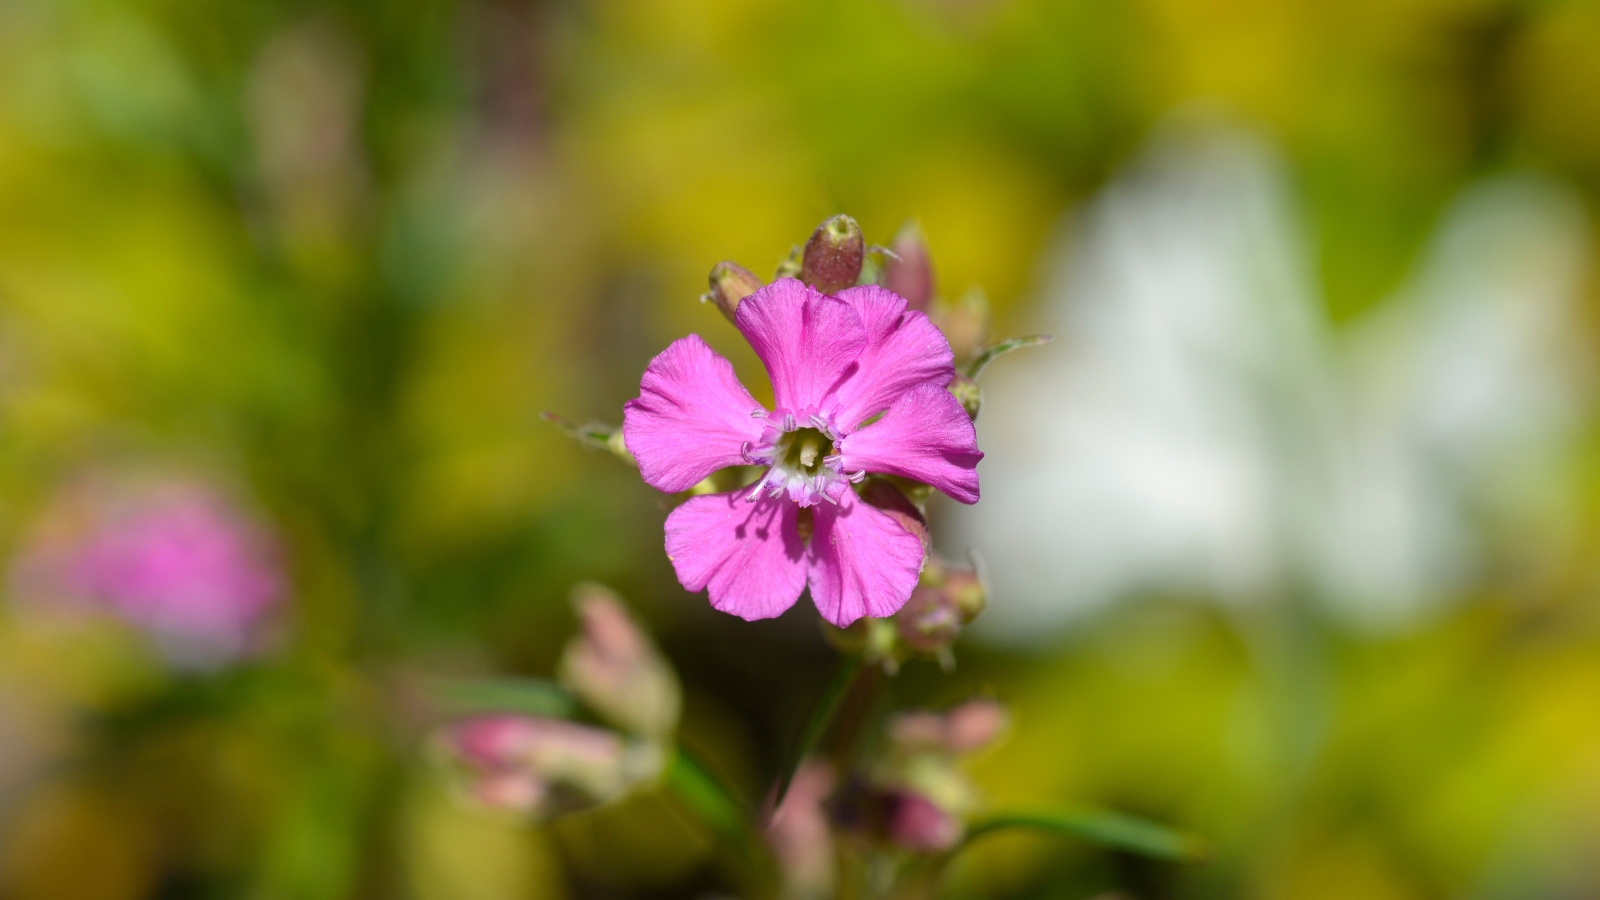 A close-up of a purple catchfly flower glistens in sunlight against a backdrop of blurred lush greenery, its delicate petals capturing the warmth of the day.